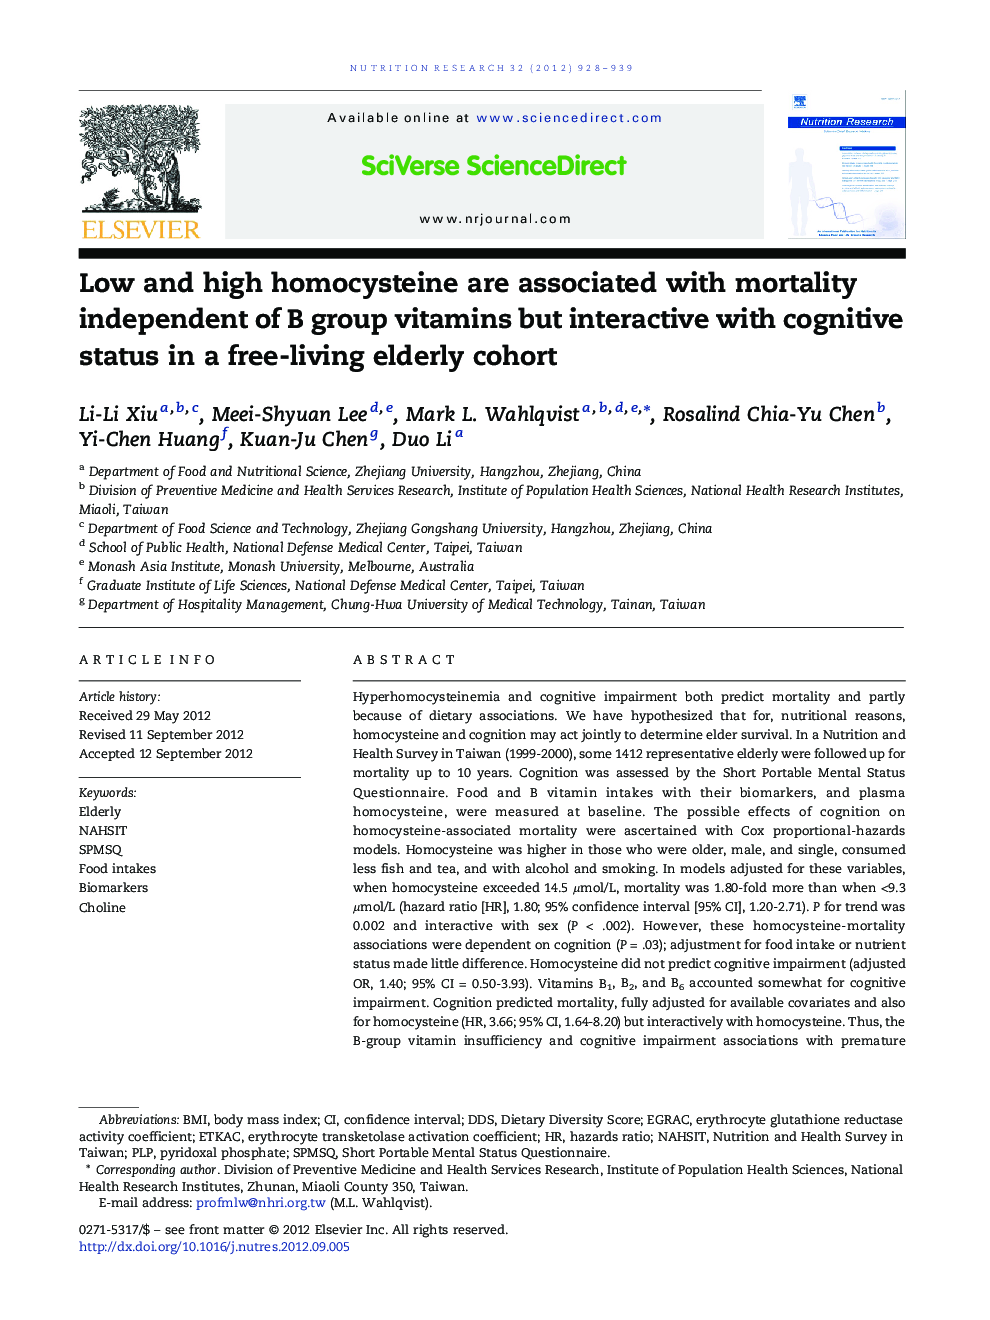 Low and high homocysteine are associated with mortality independent of B group vitamins but interactive with cognitive status in a free-living elderly cohort